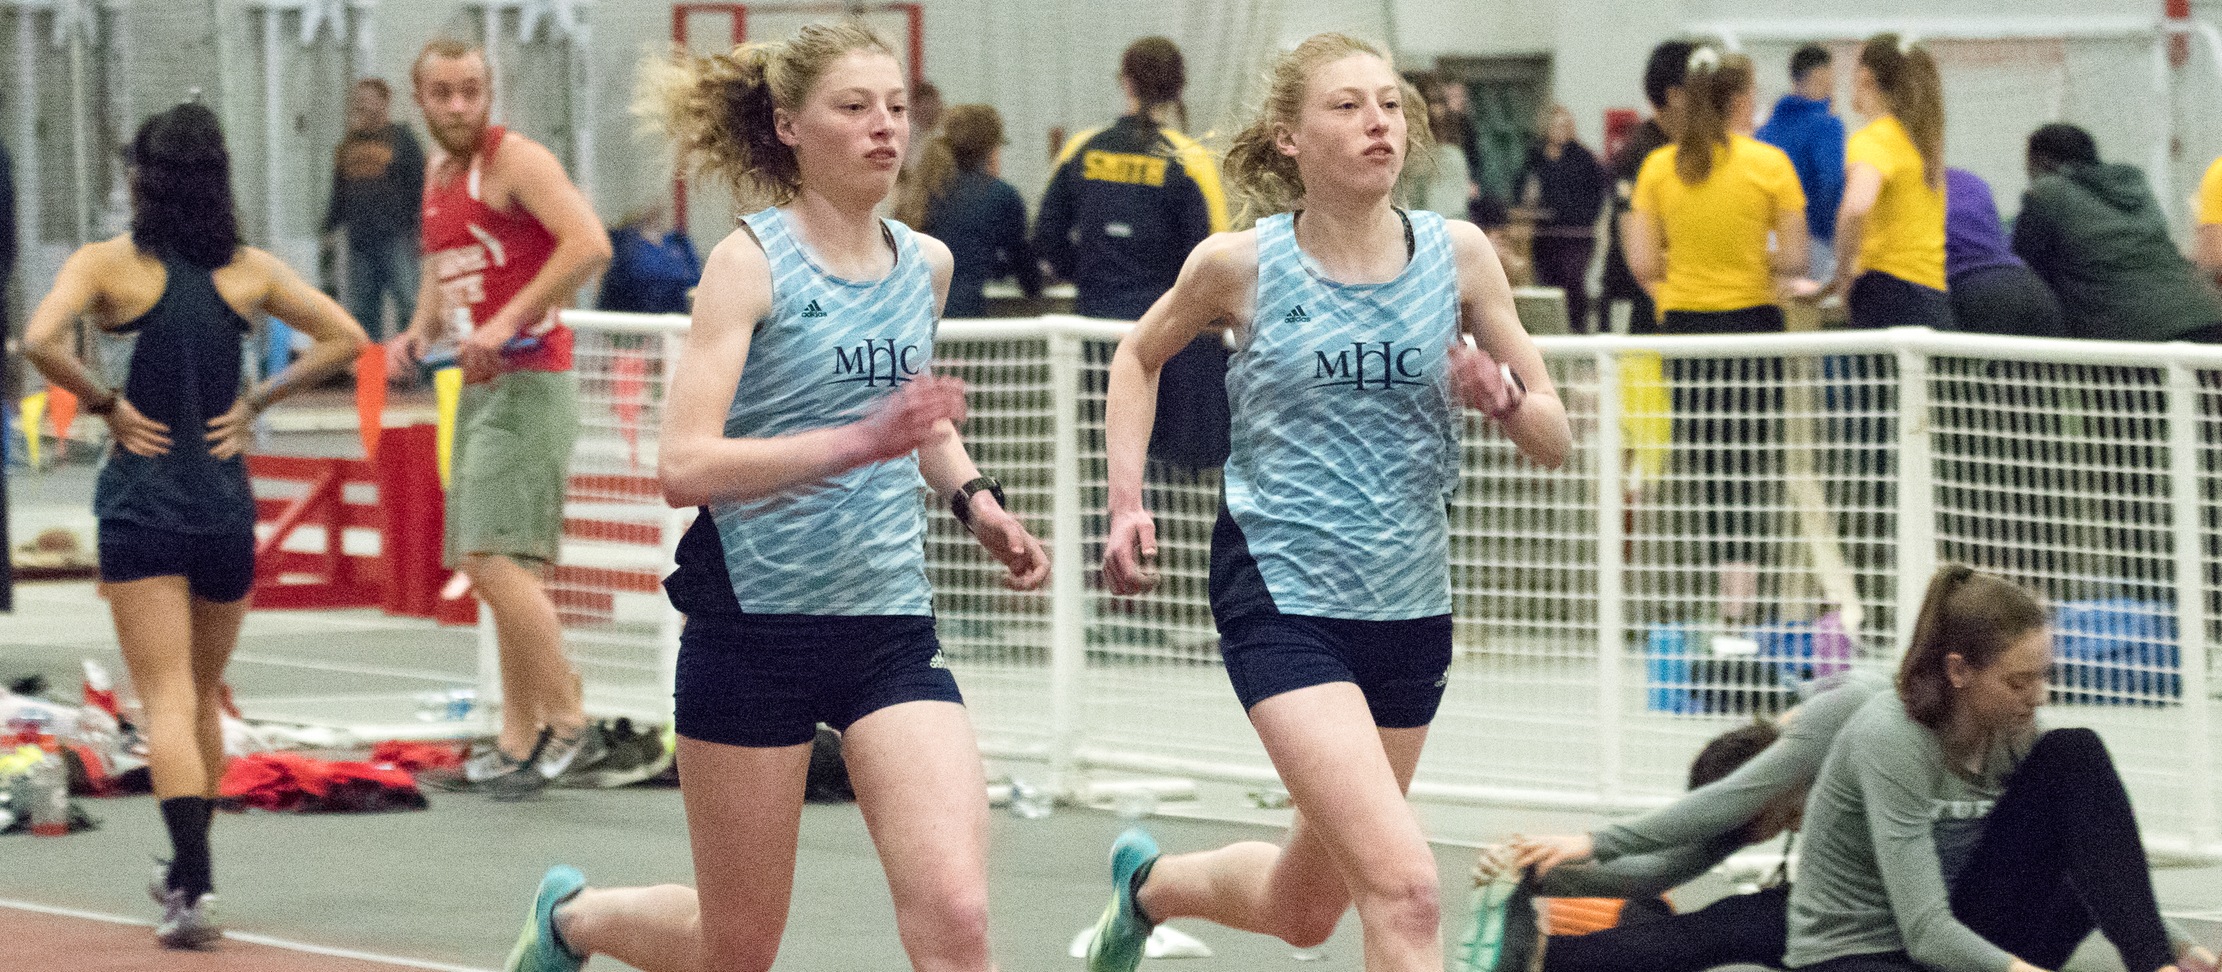 Rieders Qualify for NCAA Division III Indoor Track and Field Championships at Tufts National Qualifying Meet